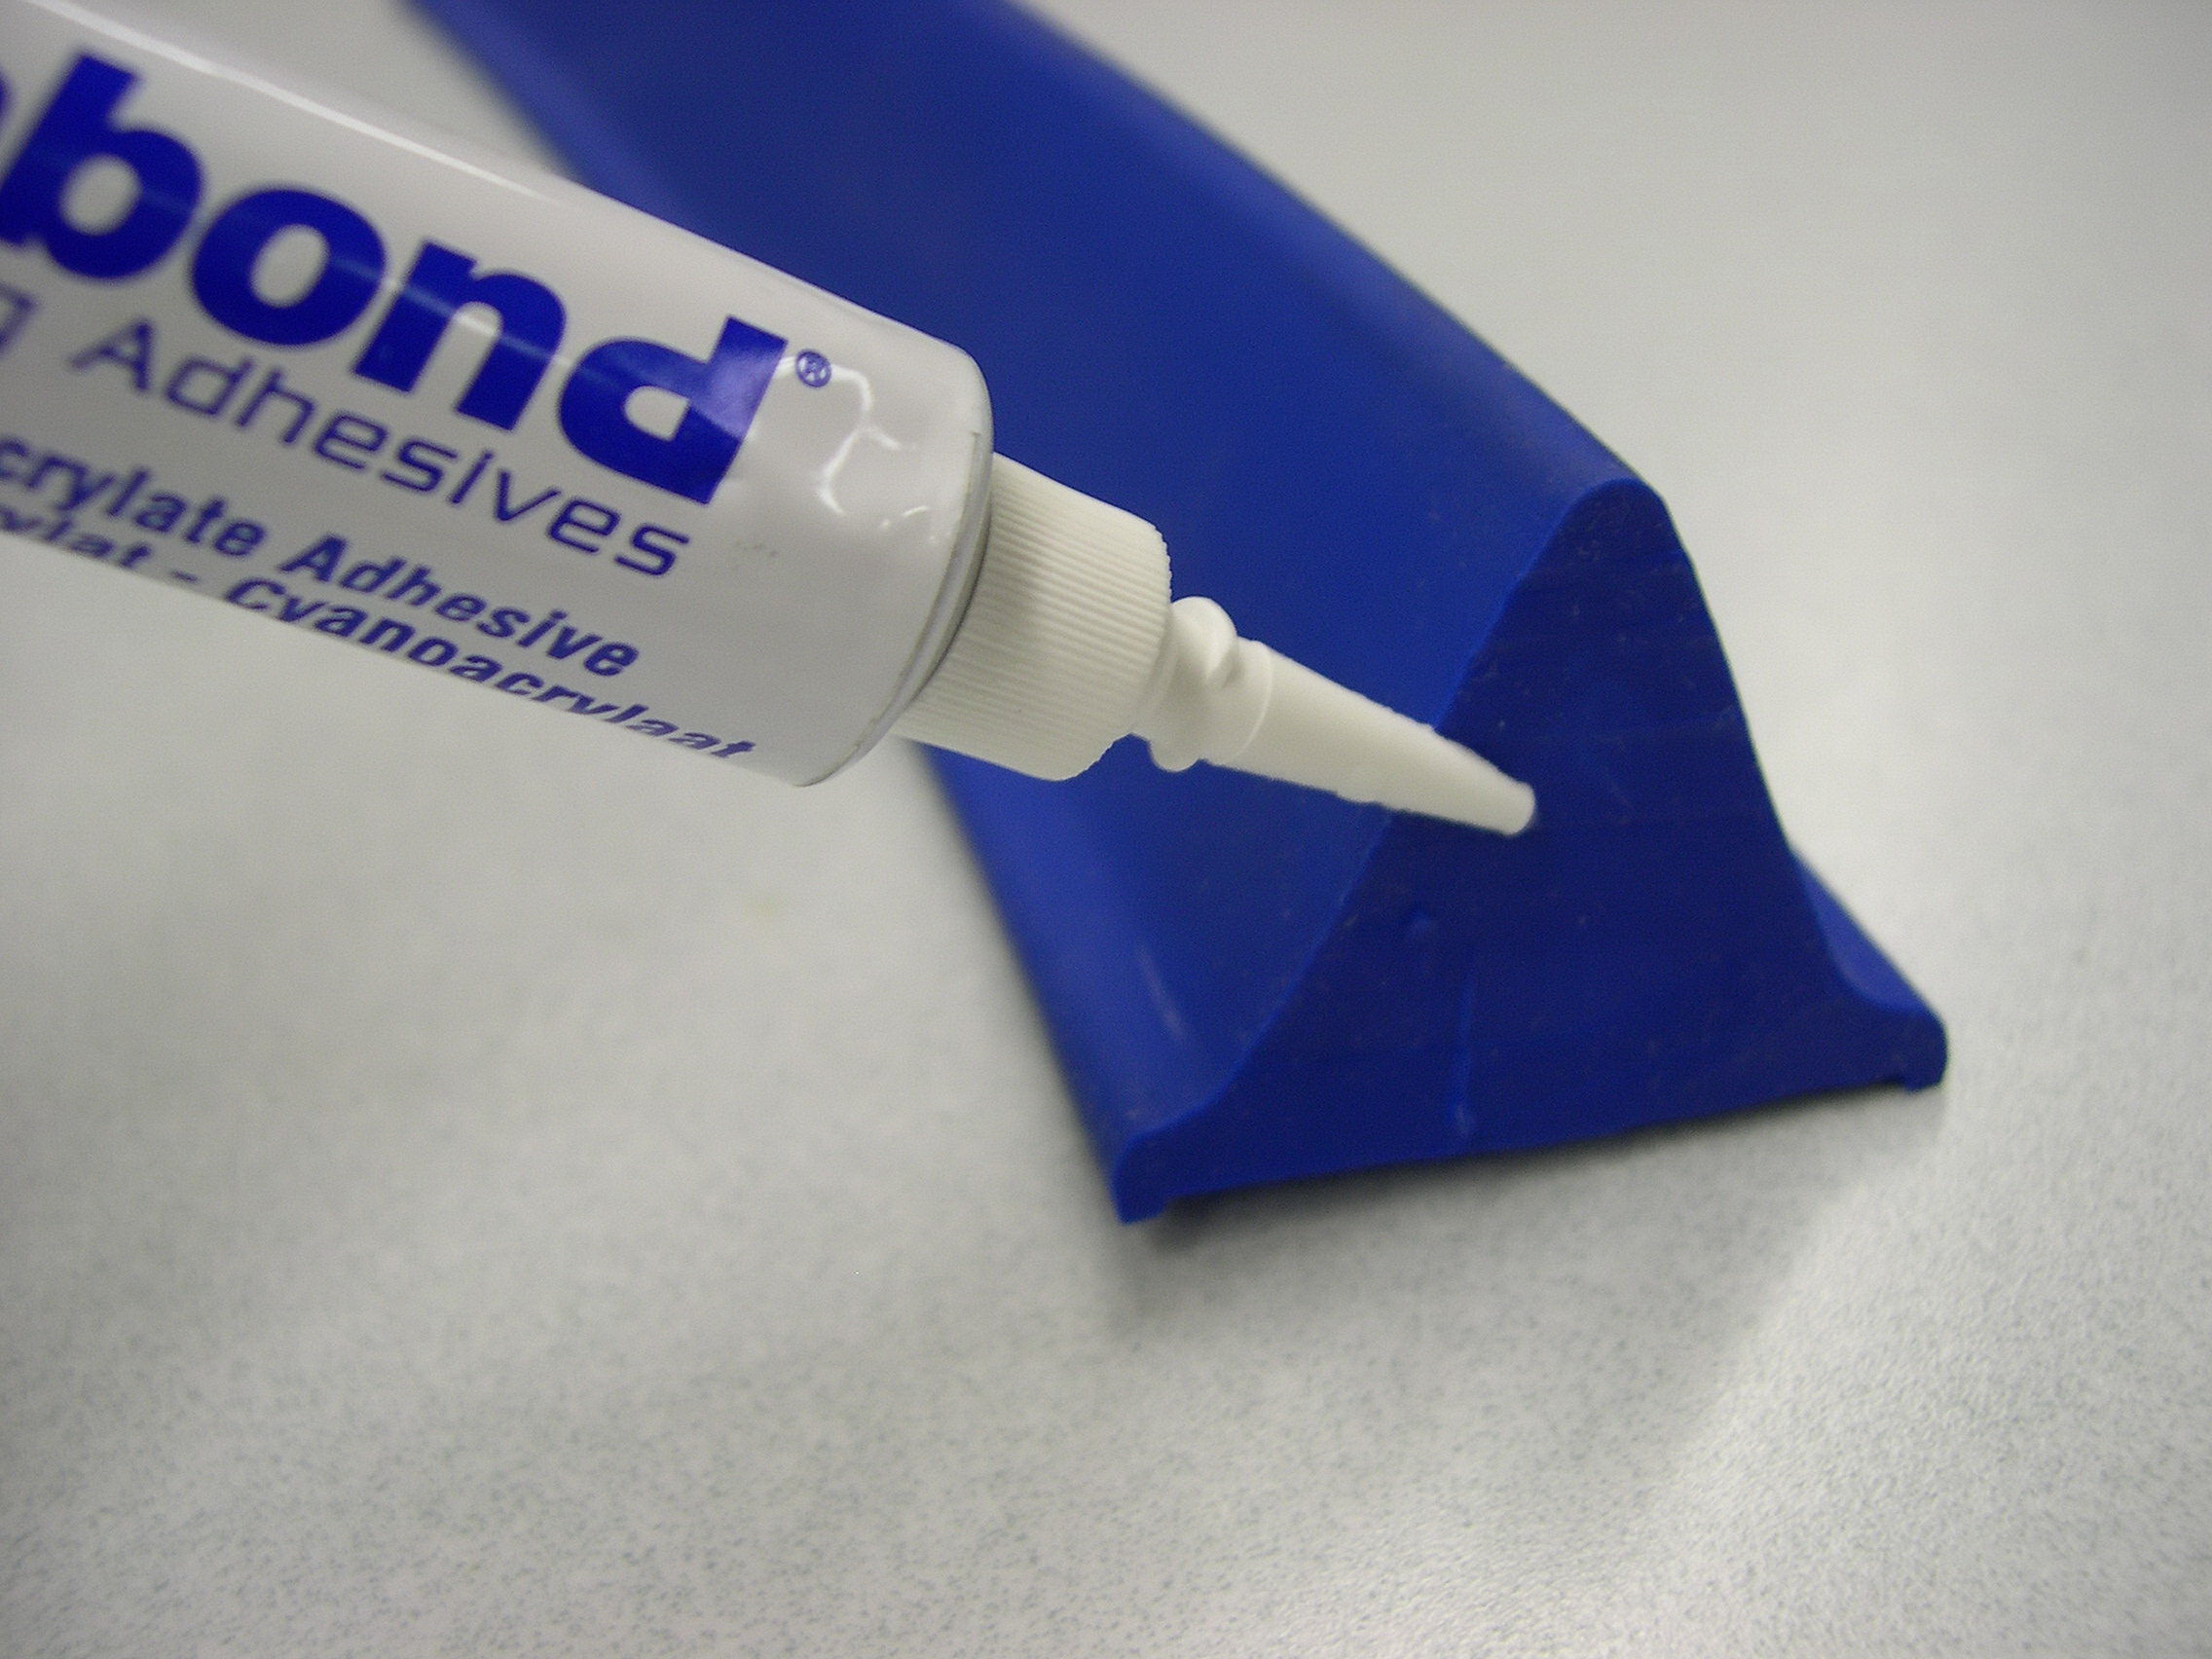 Silicone surface preparation and bonding